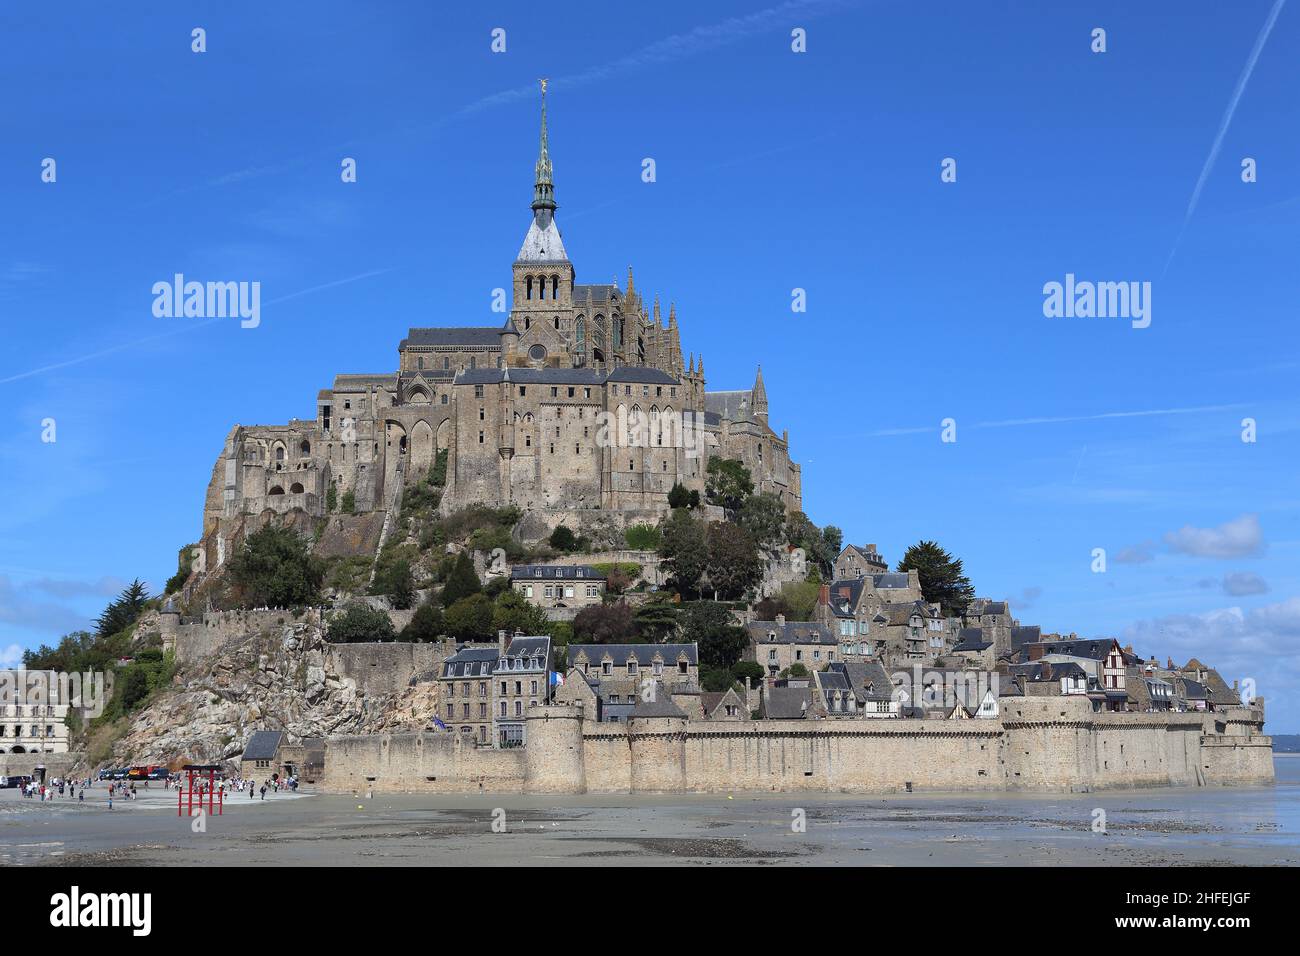 MONT SAINT-MICHEL, FRANCE - SEPTEMBER 2, 2019: It is a small fortified rocky island with a medieval abbey on top, which becomes part of the land at lo Stock Photo